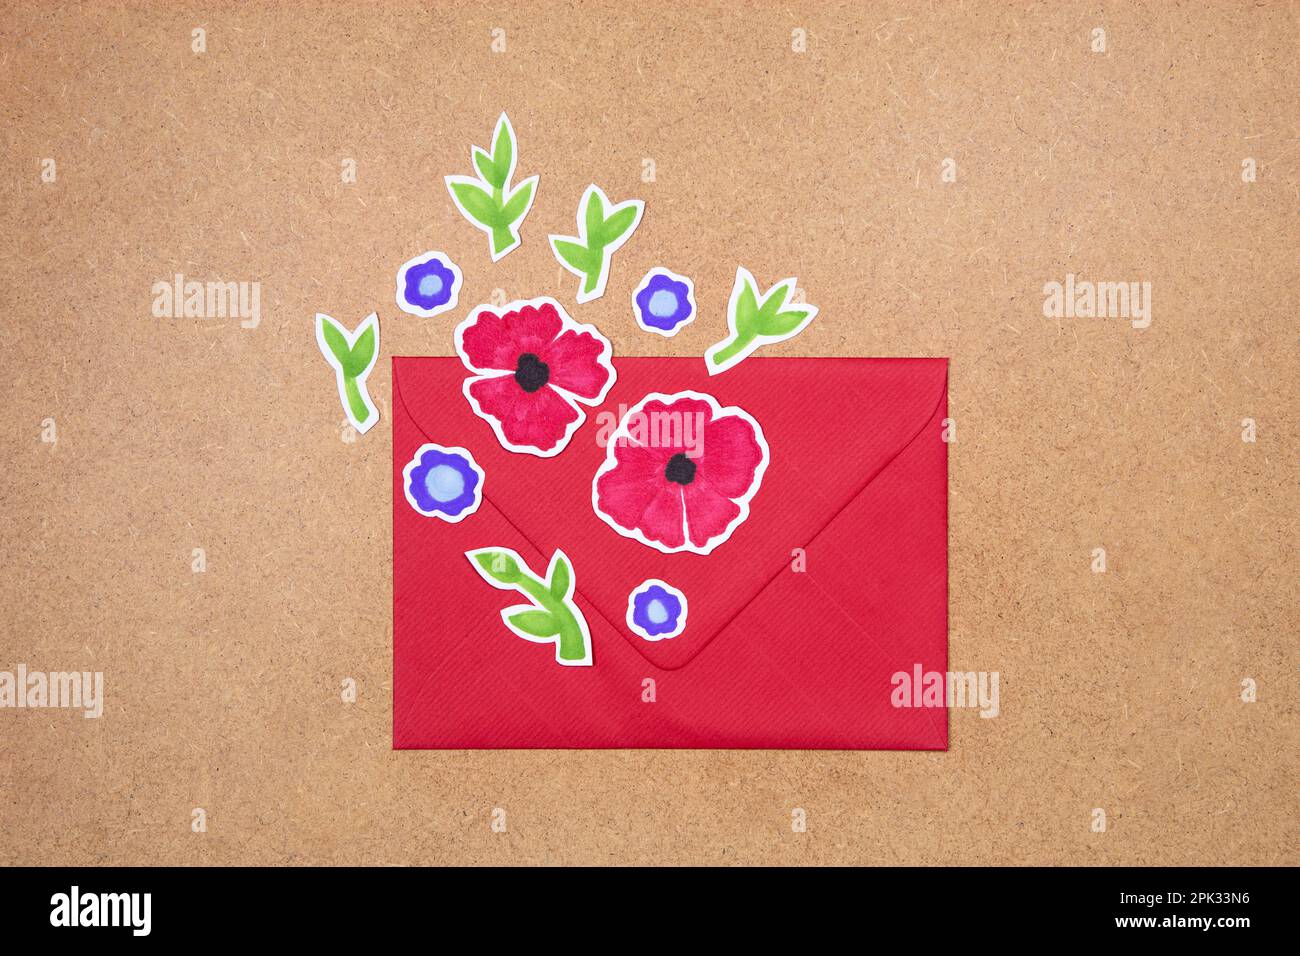 Red envelope with hand drawn flowers deco arrangement on neutral background. Greetings concept, invitation, wedding birthday card. Stock Photo